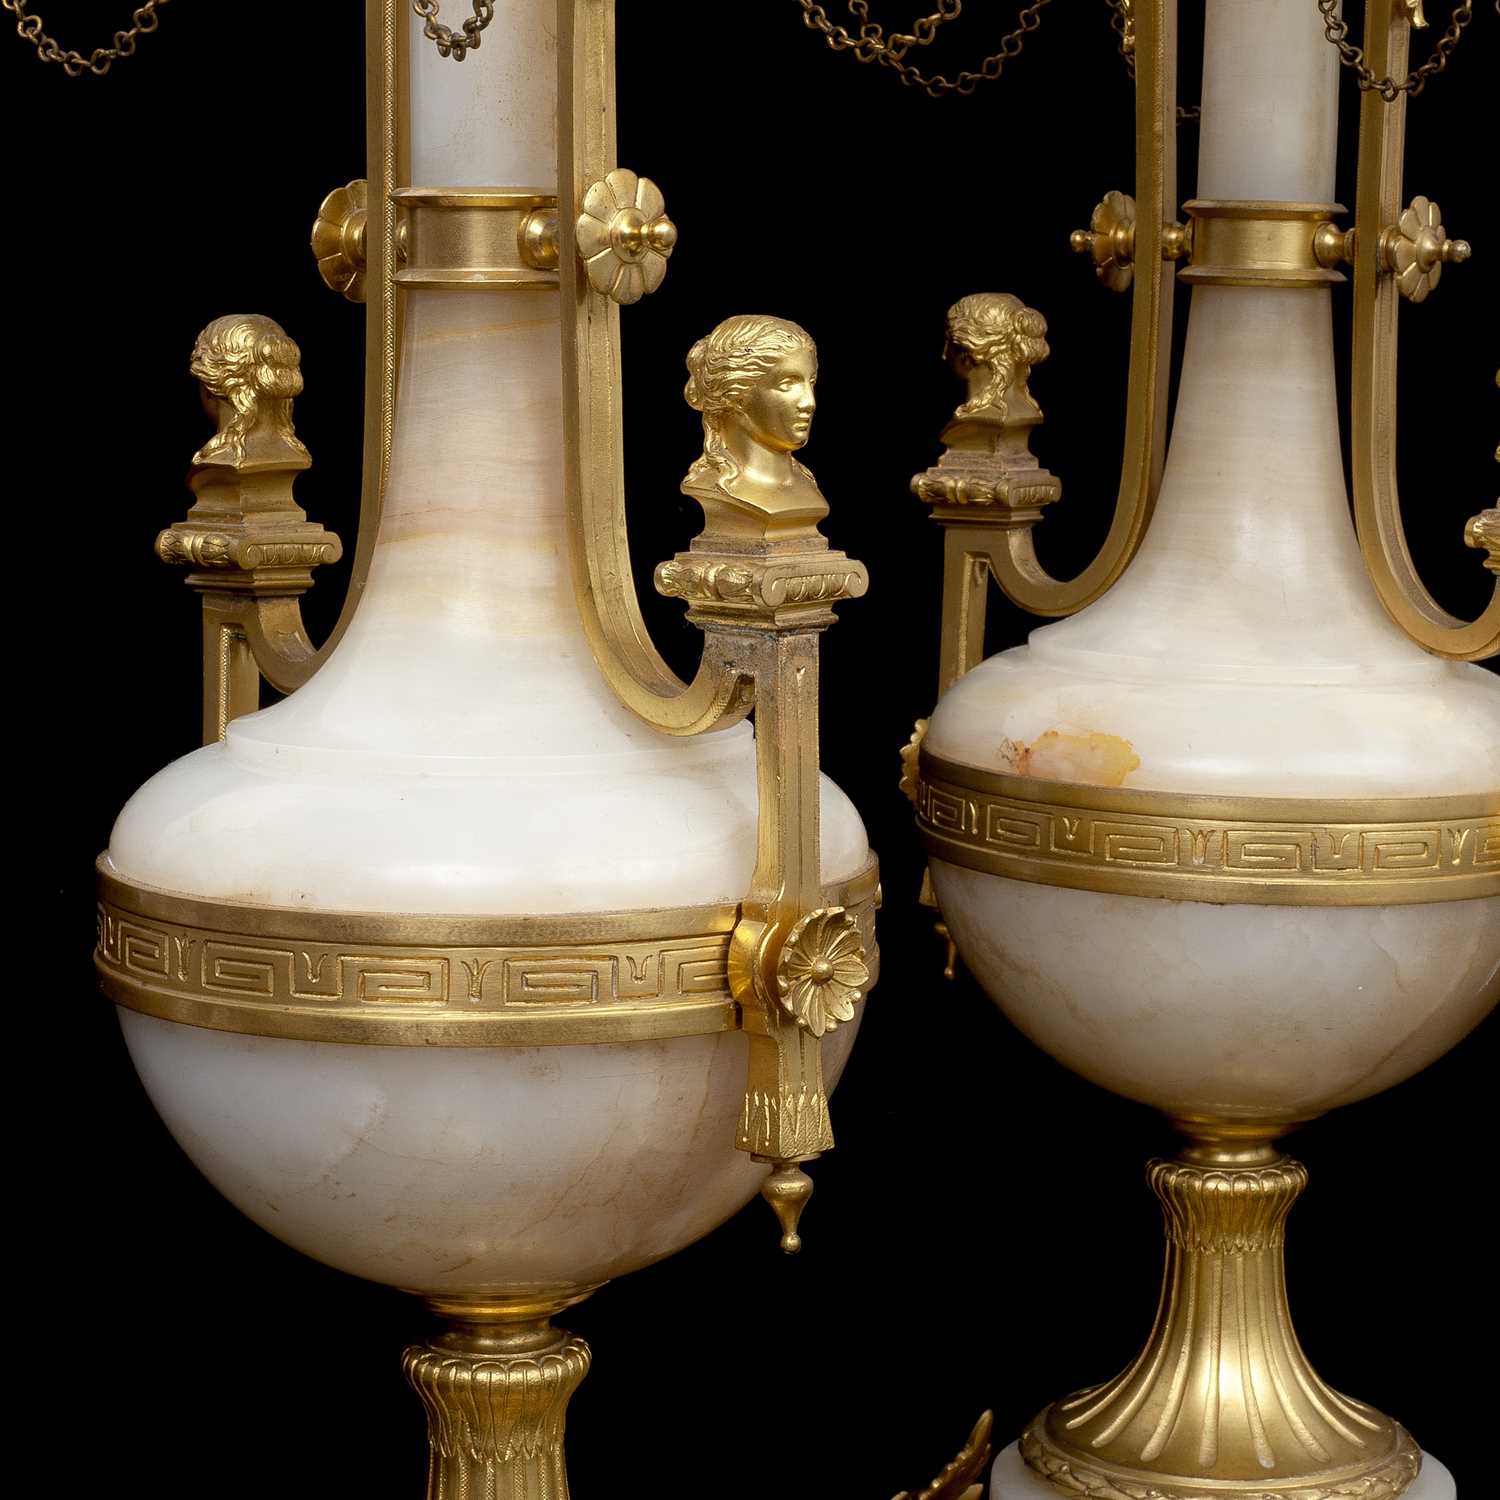 A FINE PAIR OF LATE 19TH CENTURY FRENCH GILT BRONZE AND ALGERIAN ONYX CANDELABRA - Image 2 of 4